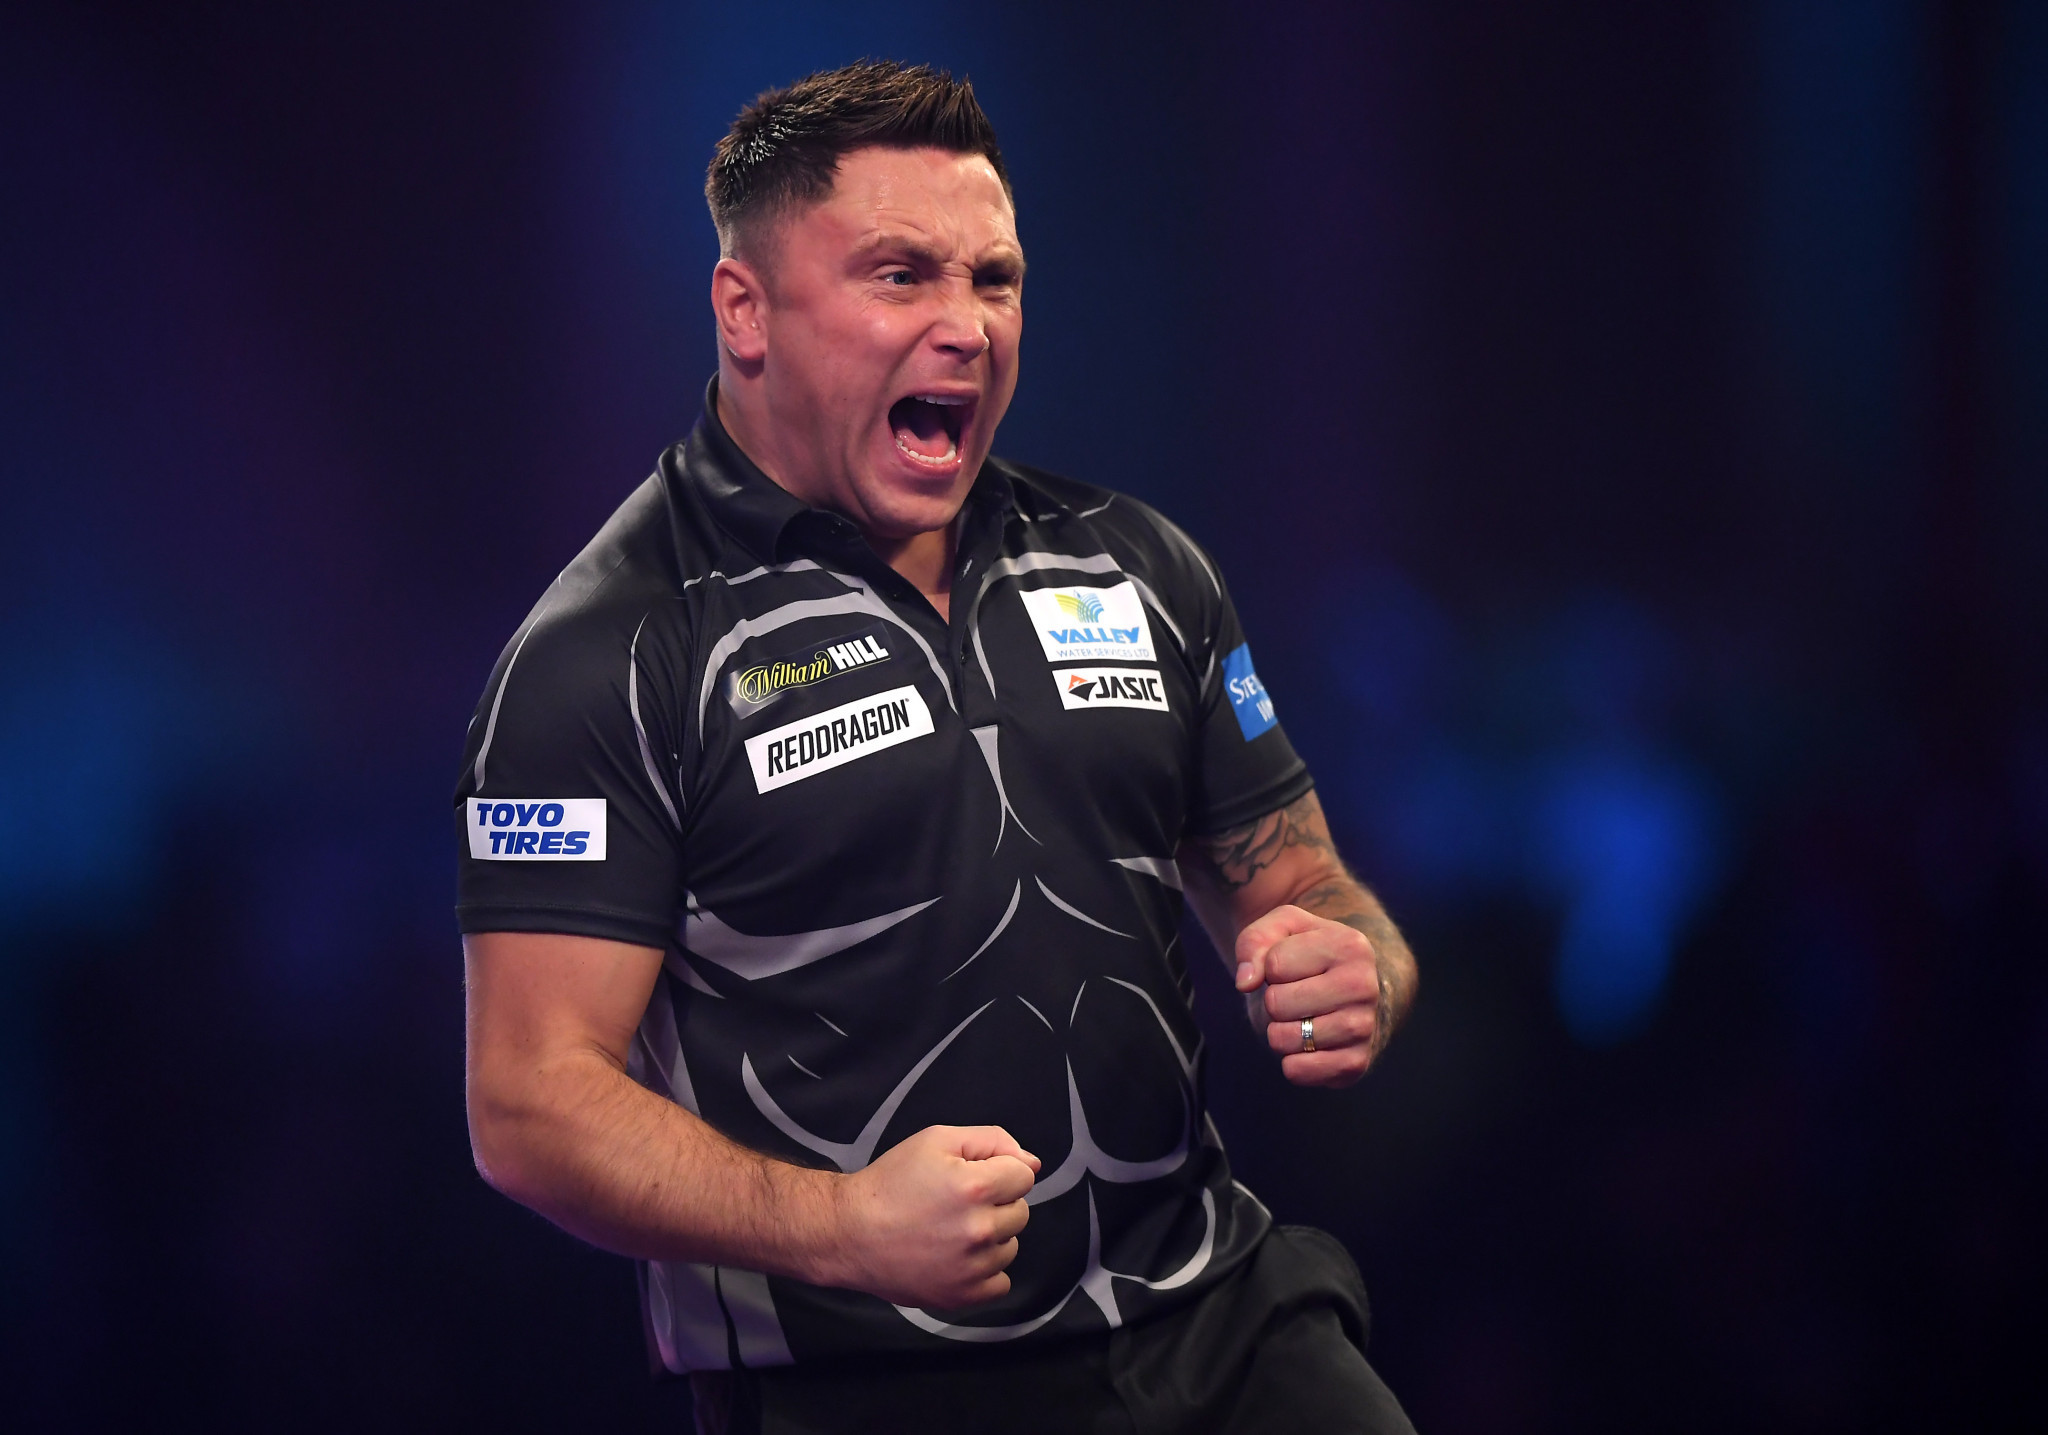 Gerwyn Price of Wales was one half of the partnership that won their opening match at the World Cup of Darts ©Getty Images